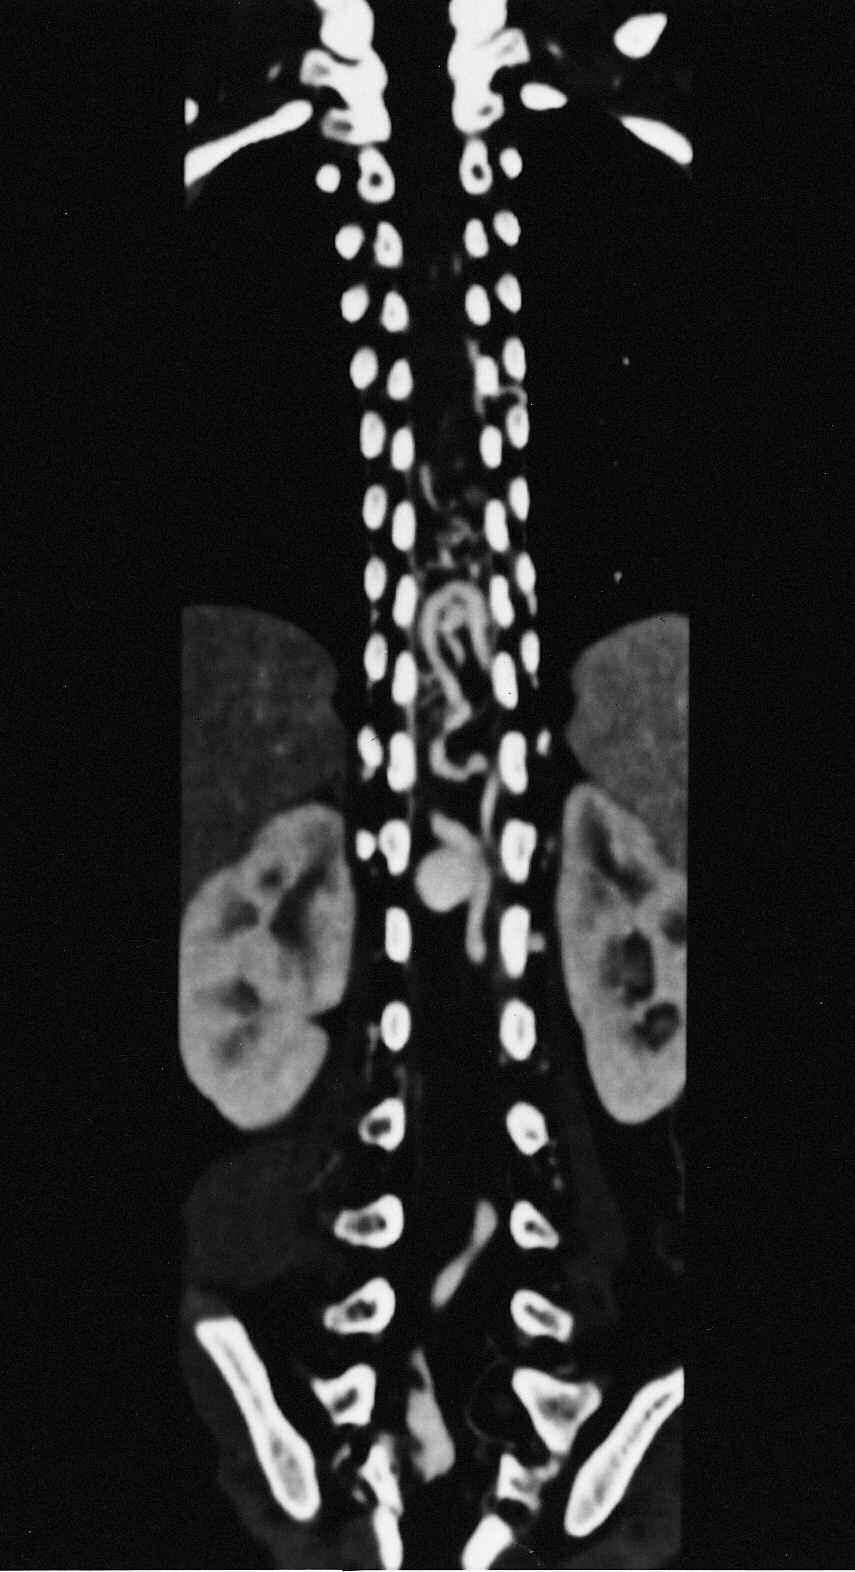 Interventional Neuroradiology 8: 37-44, 2002 0.015 CTD (Balt Company, Paris, France) and glue embolization was performed with 1 cc of Histoacryl, 0.8 cc of Lipiodol, and 0.5 g of Tantalum powder.